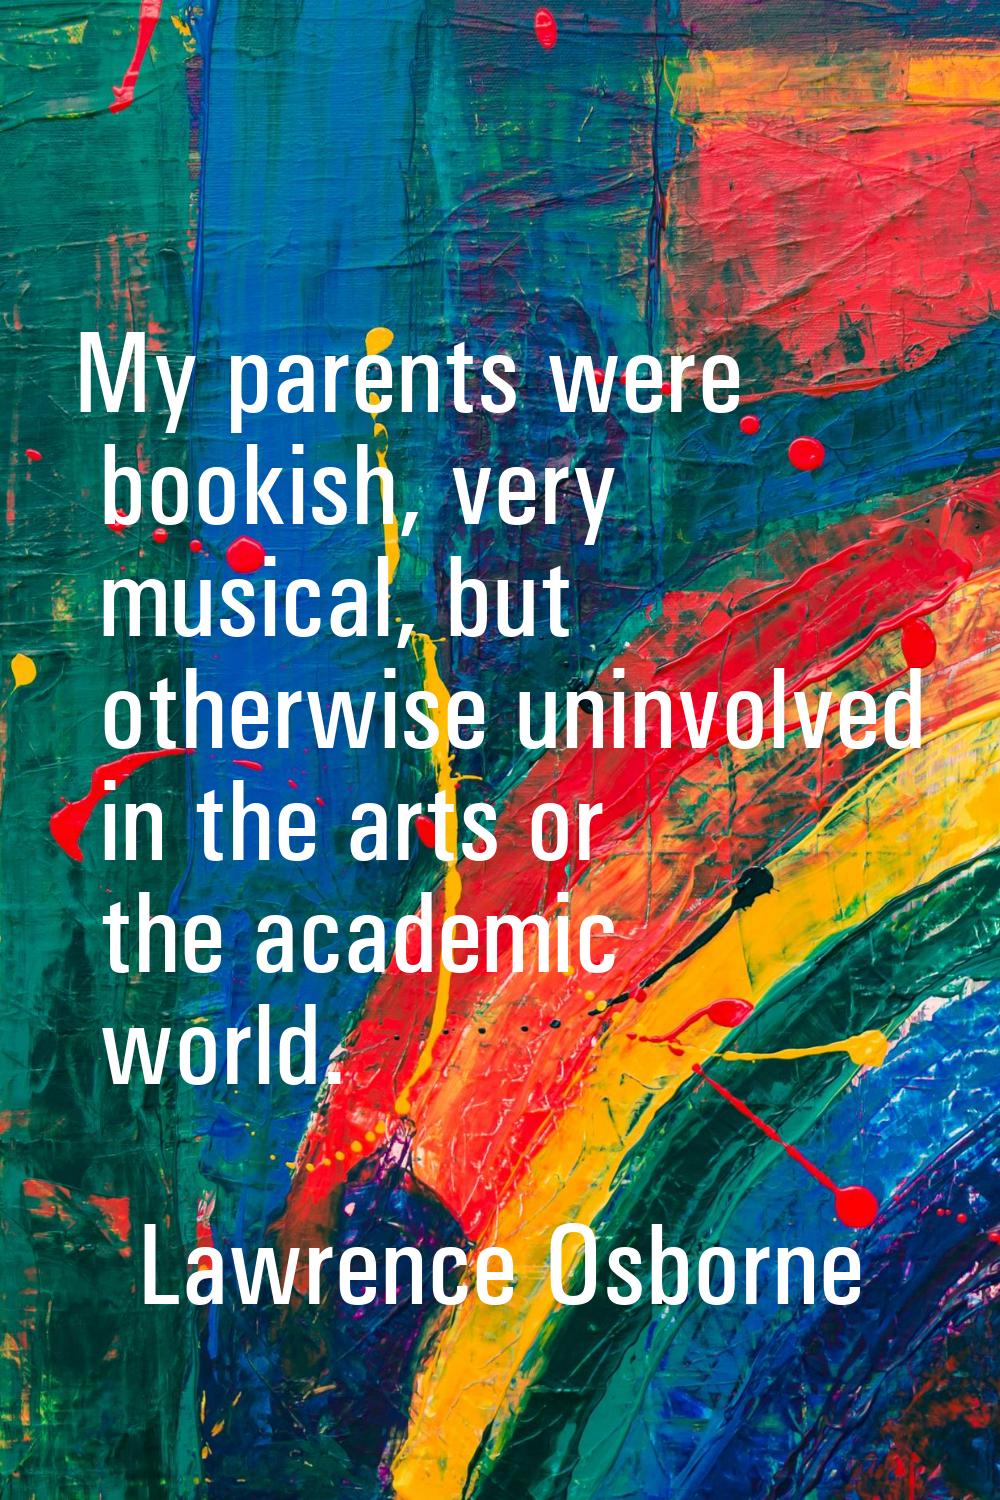 My parents were bookish, very musical, but otherwise uninvolved in the arts or the academic world.